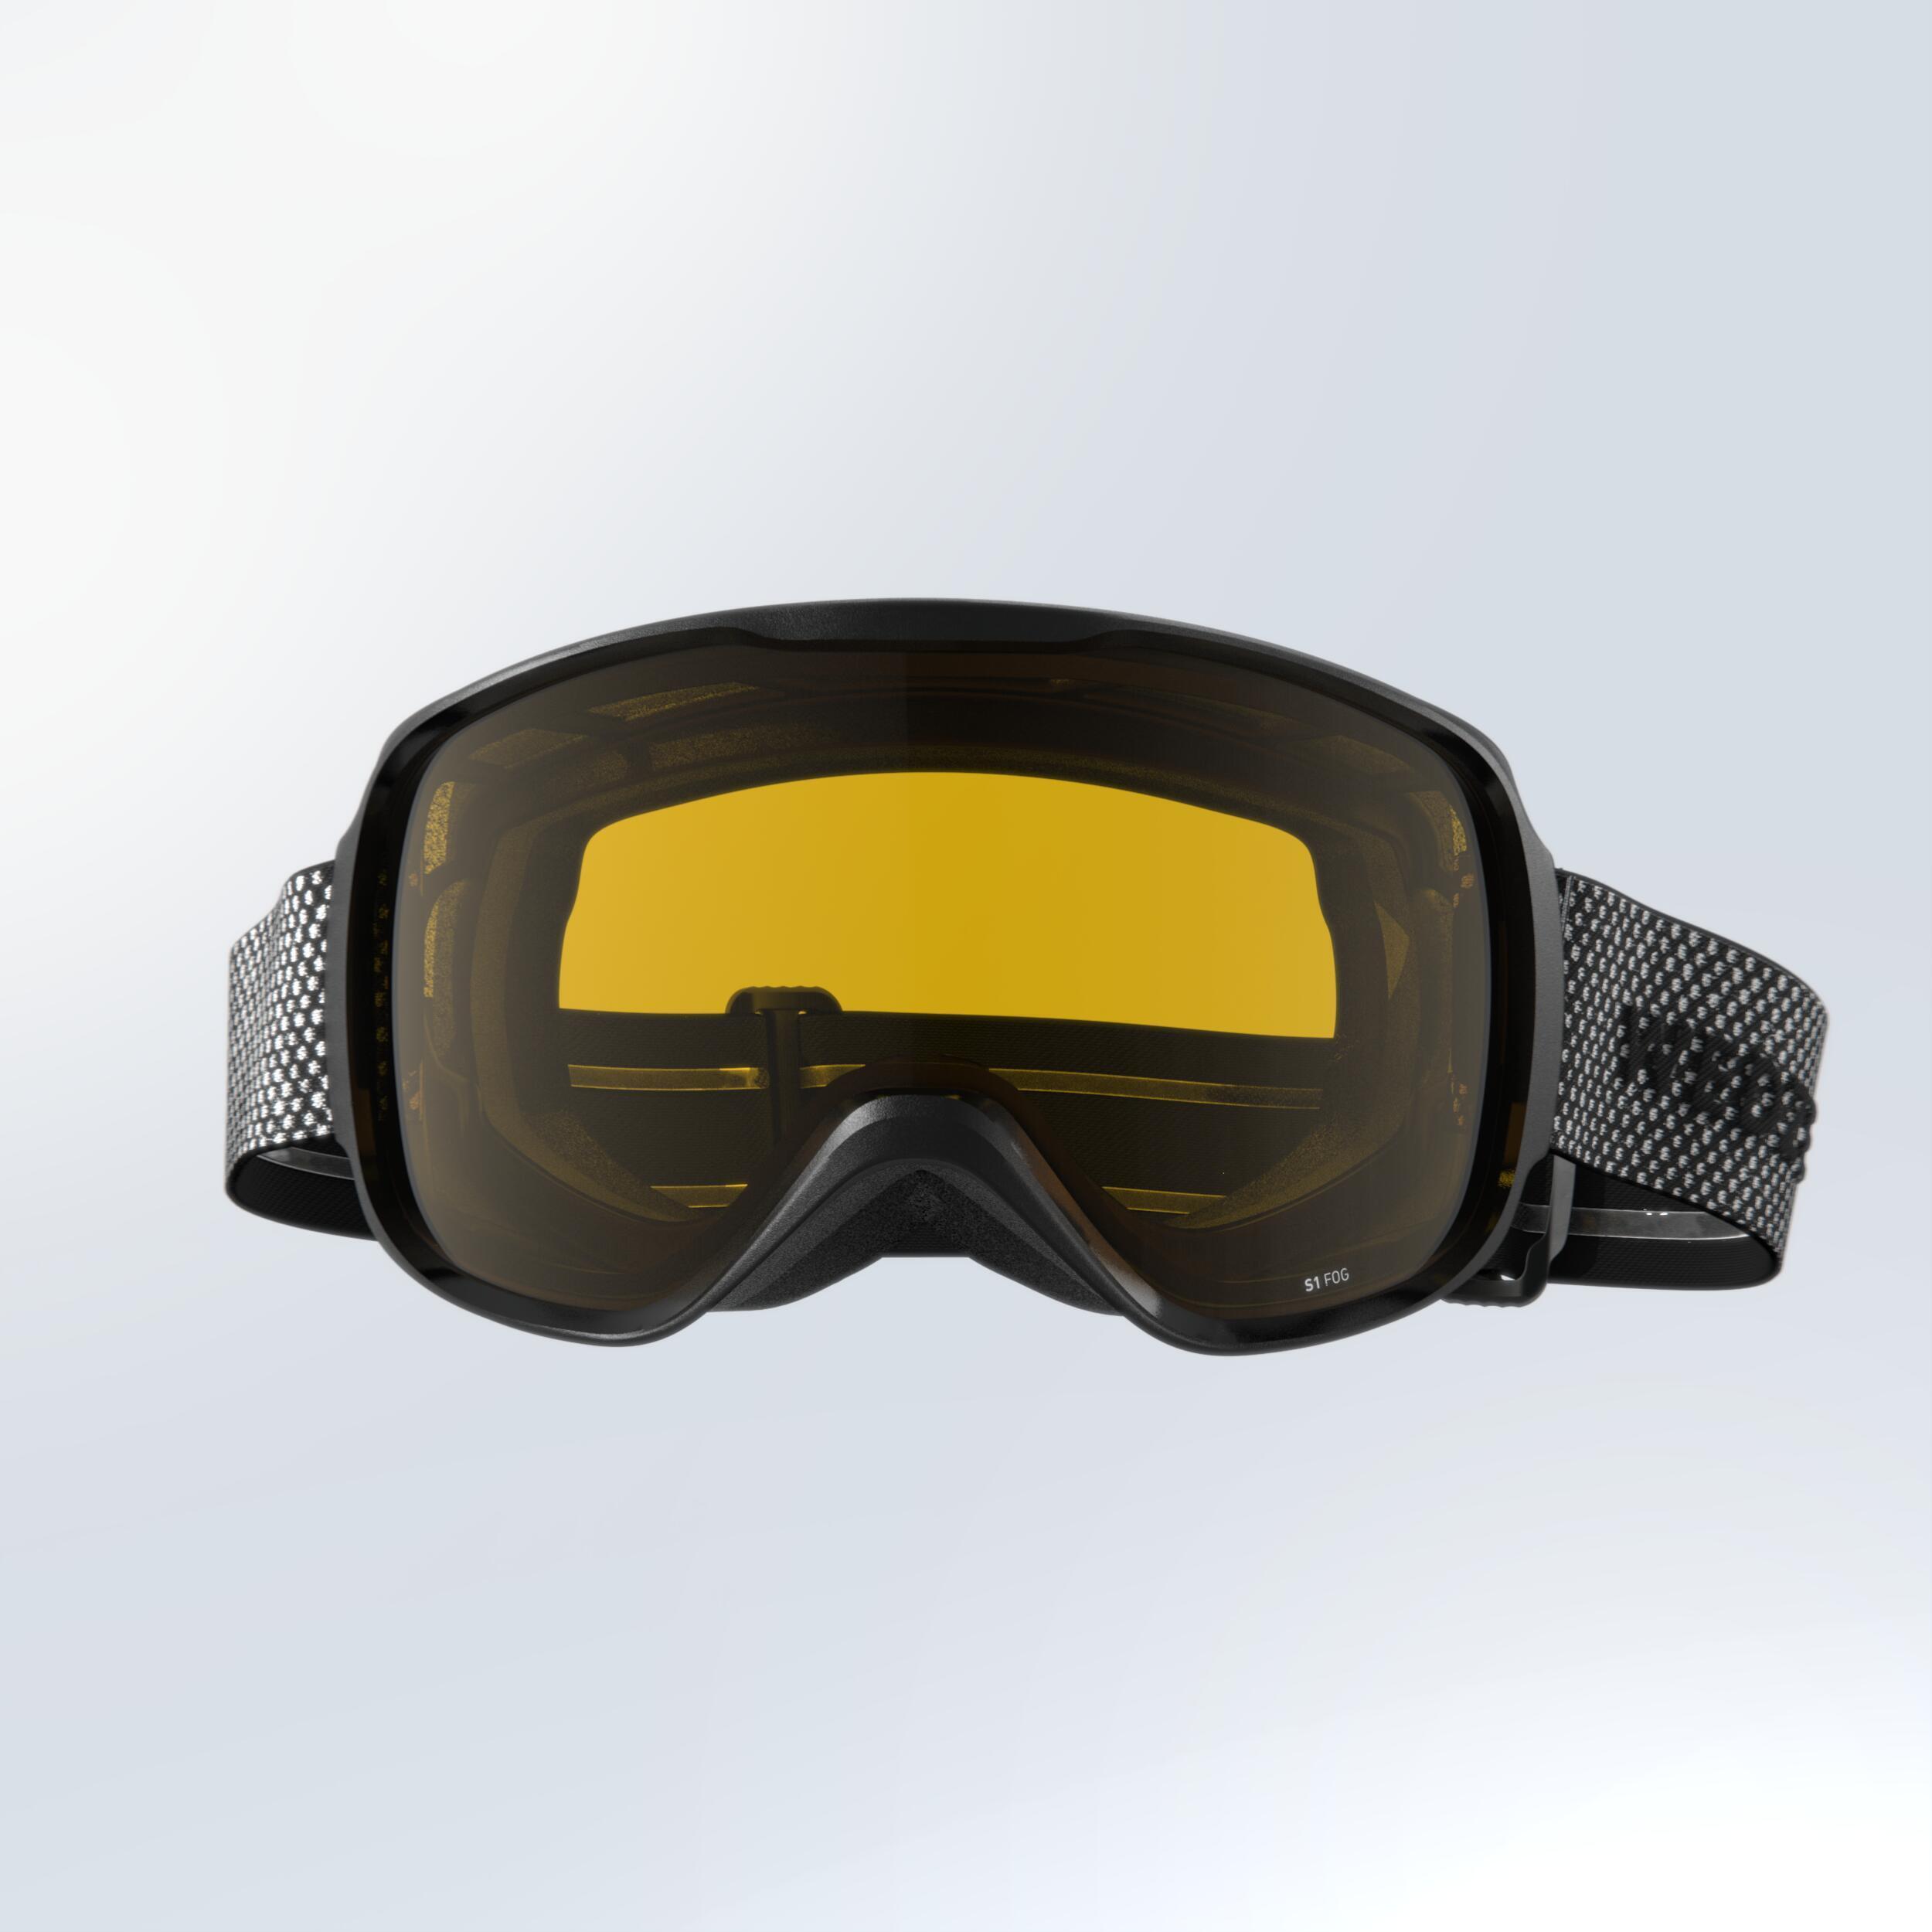 REFURBISHED KIDS AND ADULT SKIING AND SNOWBOARDING GOGGLES - A GRADE 3/7